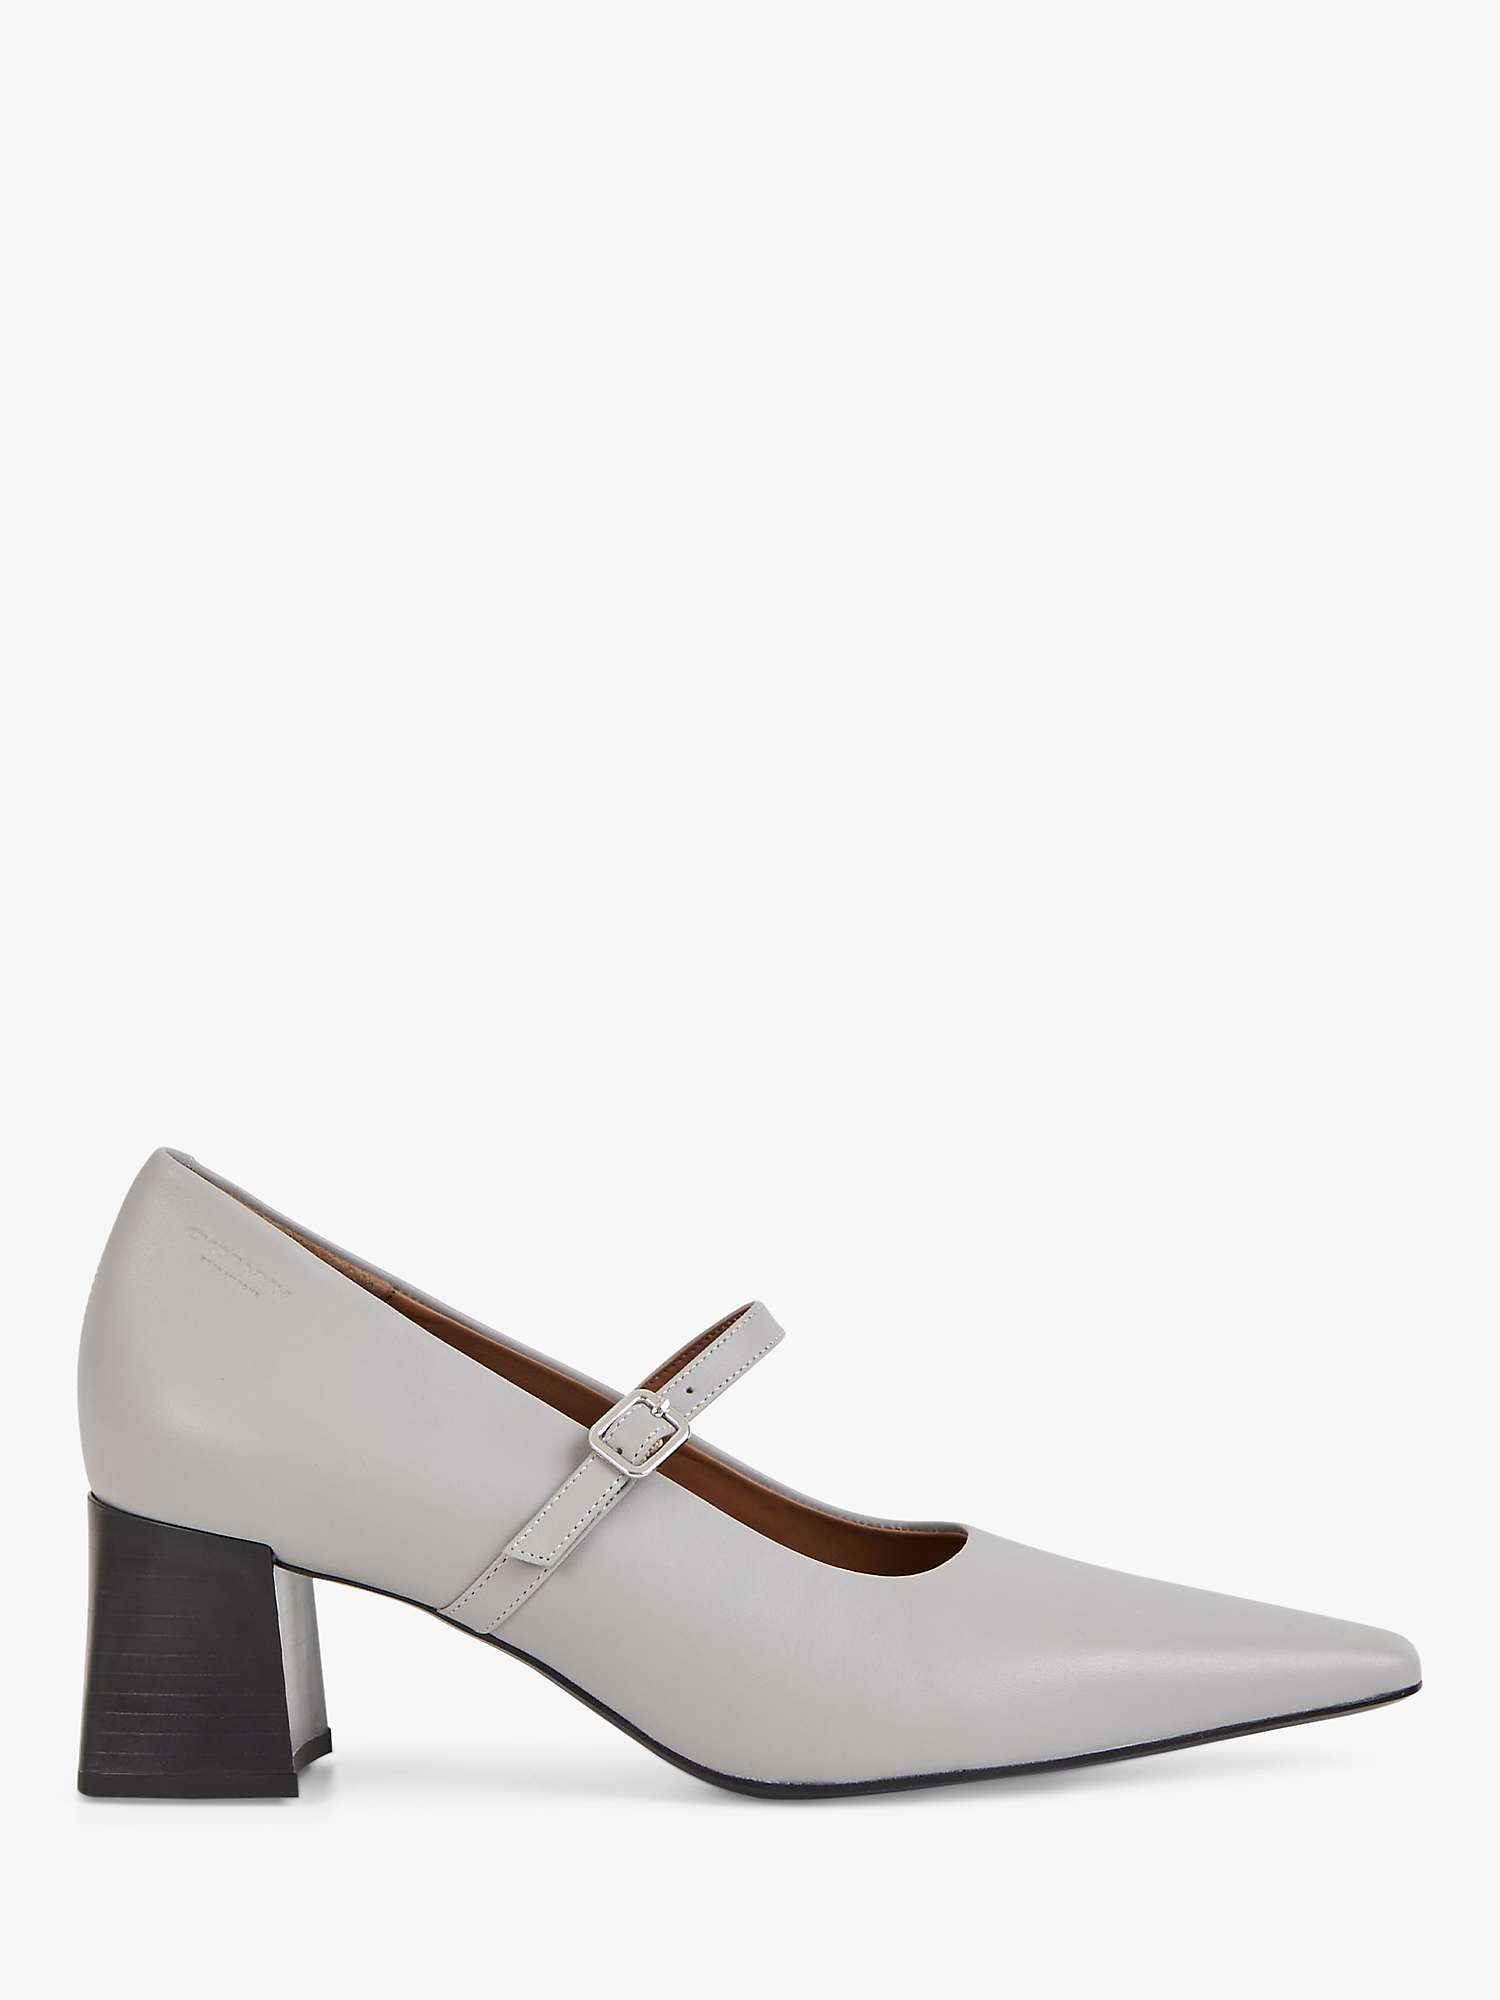 Buy Vagabond Shoemakers Altea Leather Pointed Toe Heeled Mary Jane Shoes Online at johnlewis.com